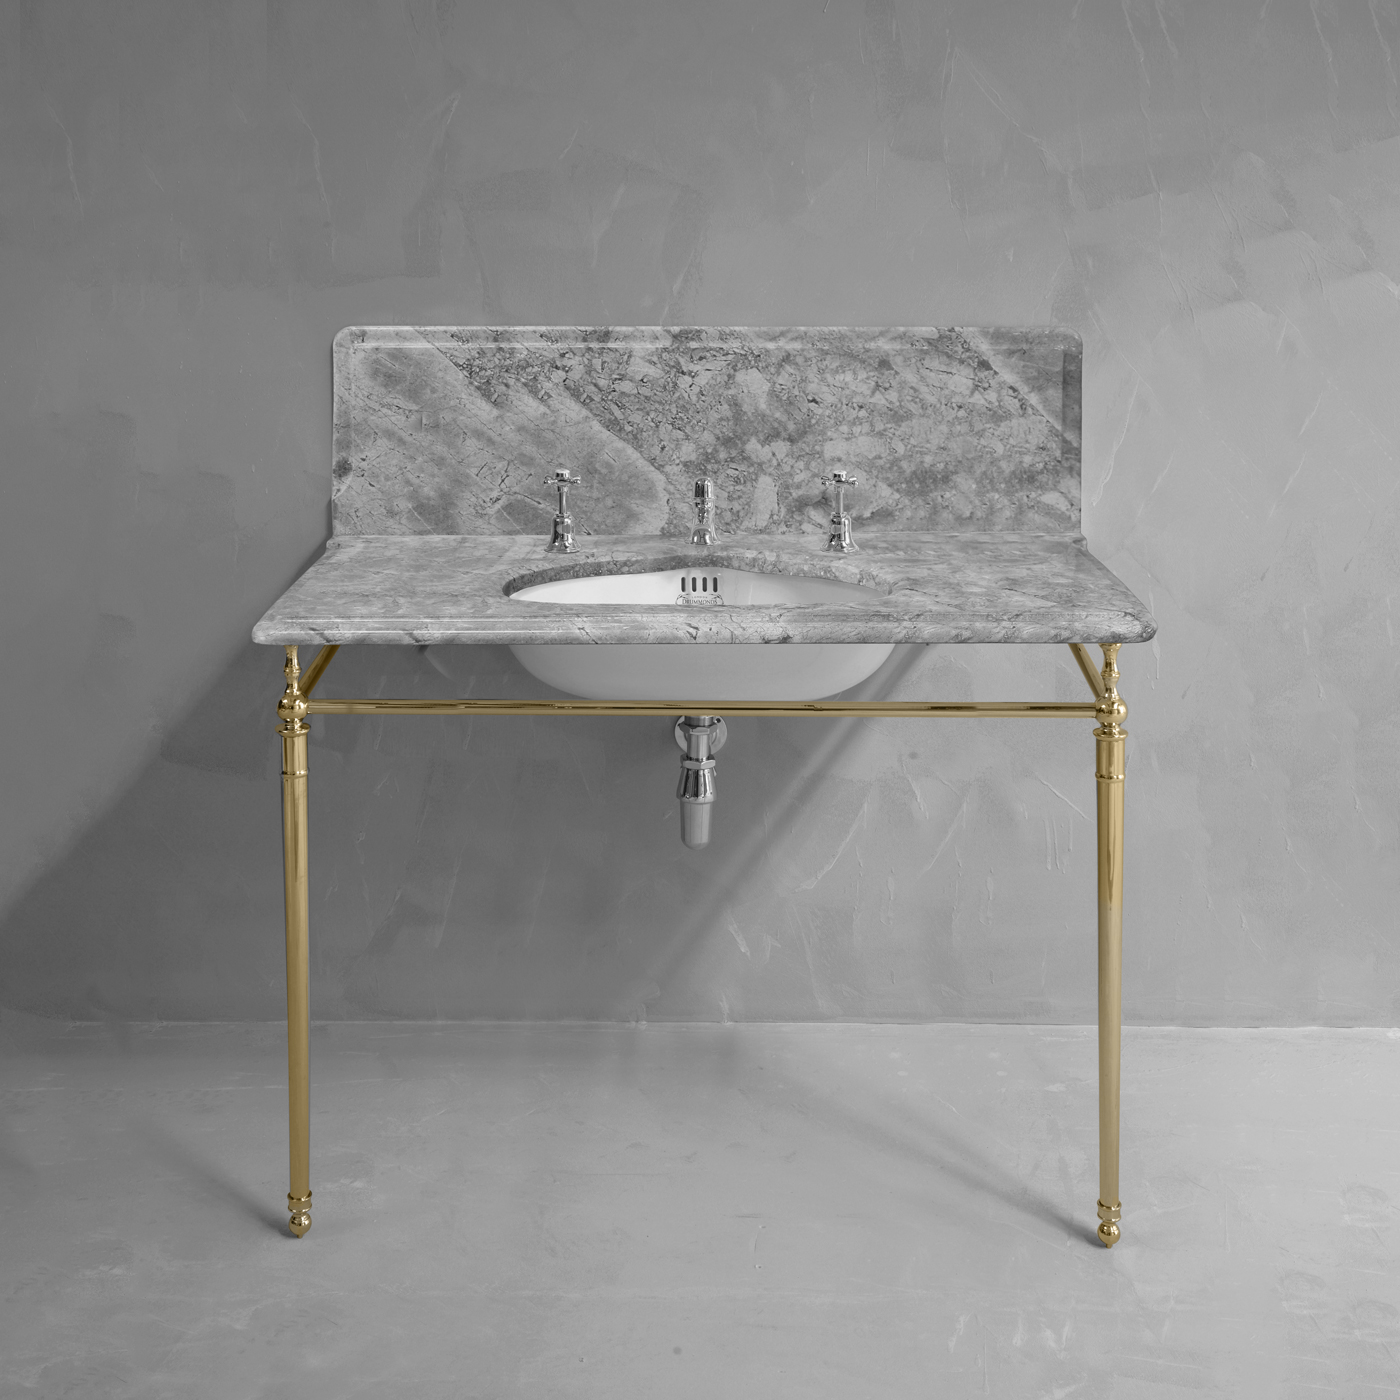 Traditional vanity unit in grey marble with brass stand. Illustration of the Bespoke Single Vanity Basin product.